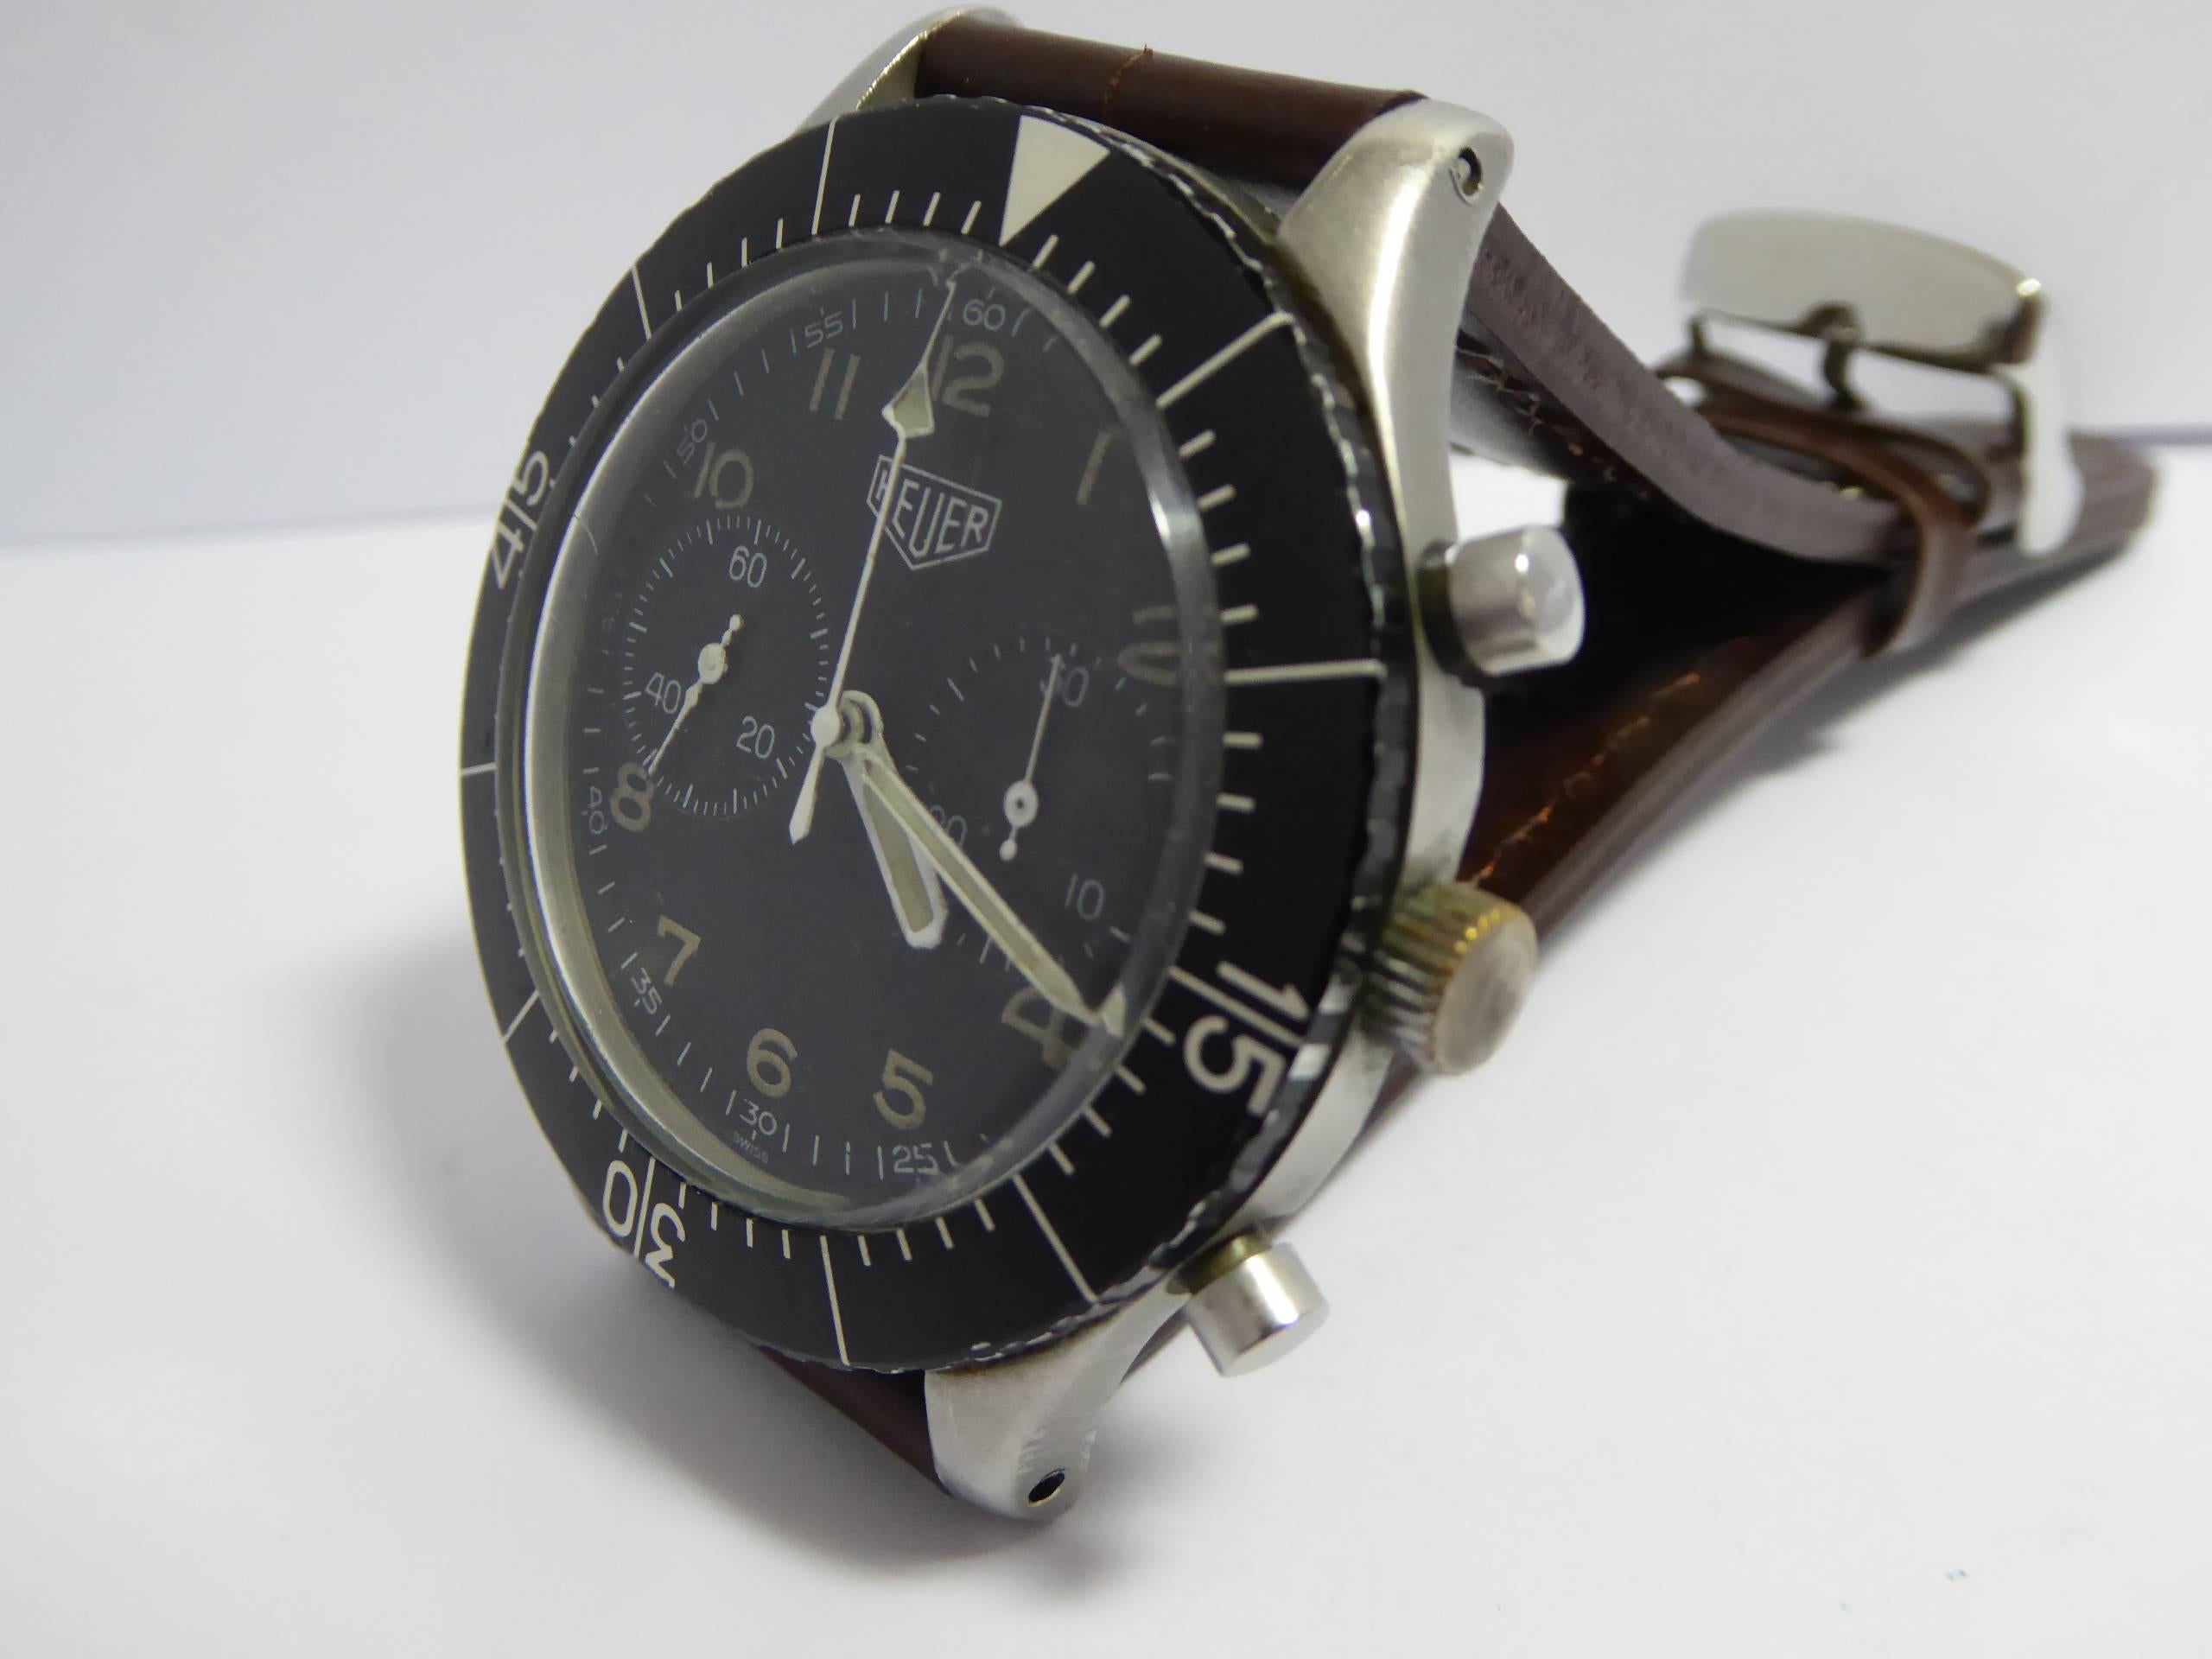 
HEUER
Bundeswehr Watch .
Watch chronometer of the German army.
Chrono 2 counters.
Black dial and bezel.
Fly back.
Mechanical movement.
Rare.
1 year warranty